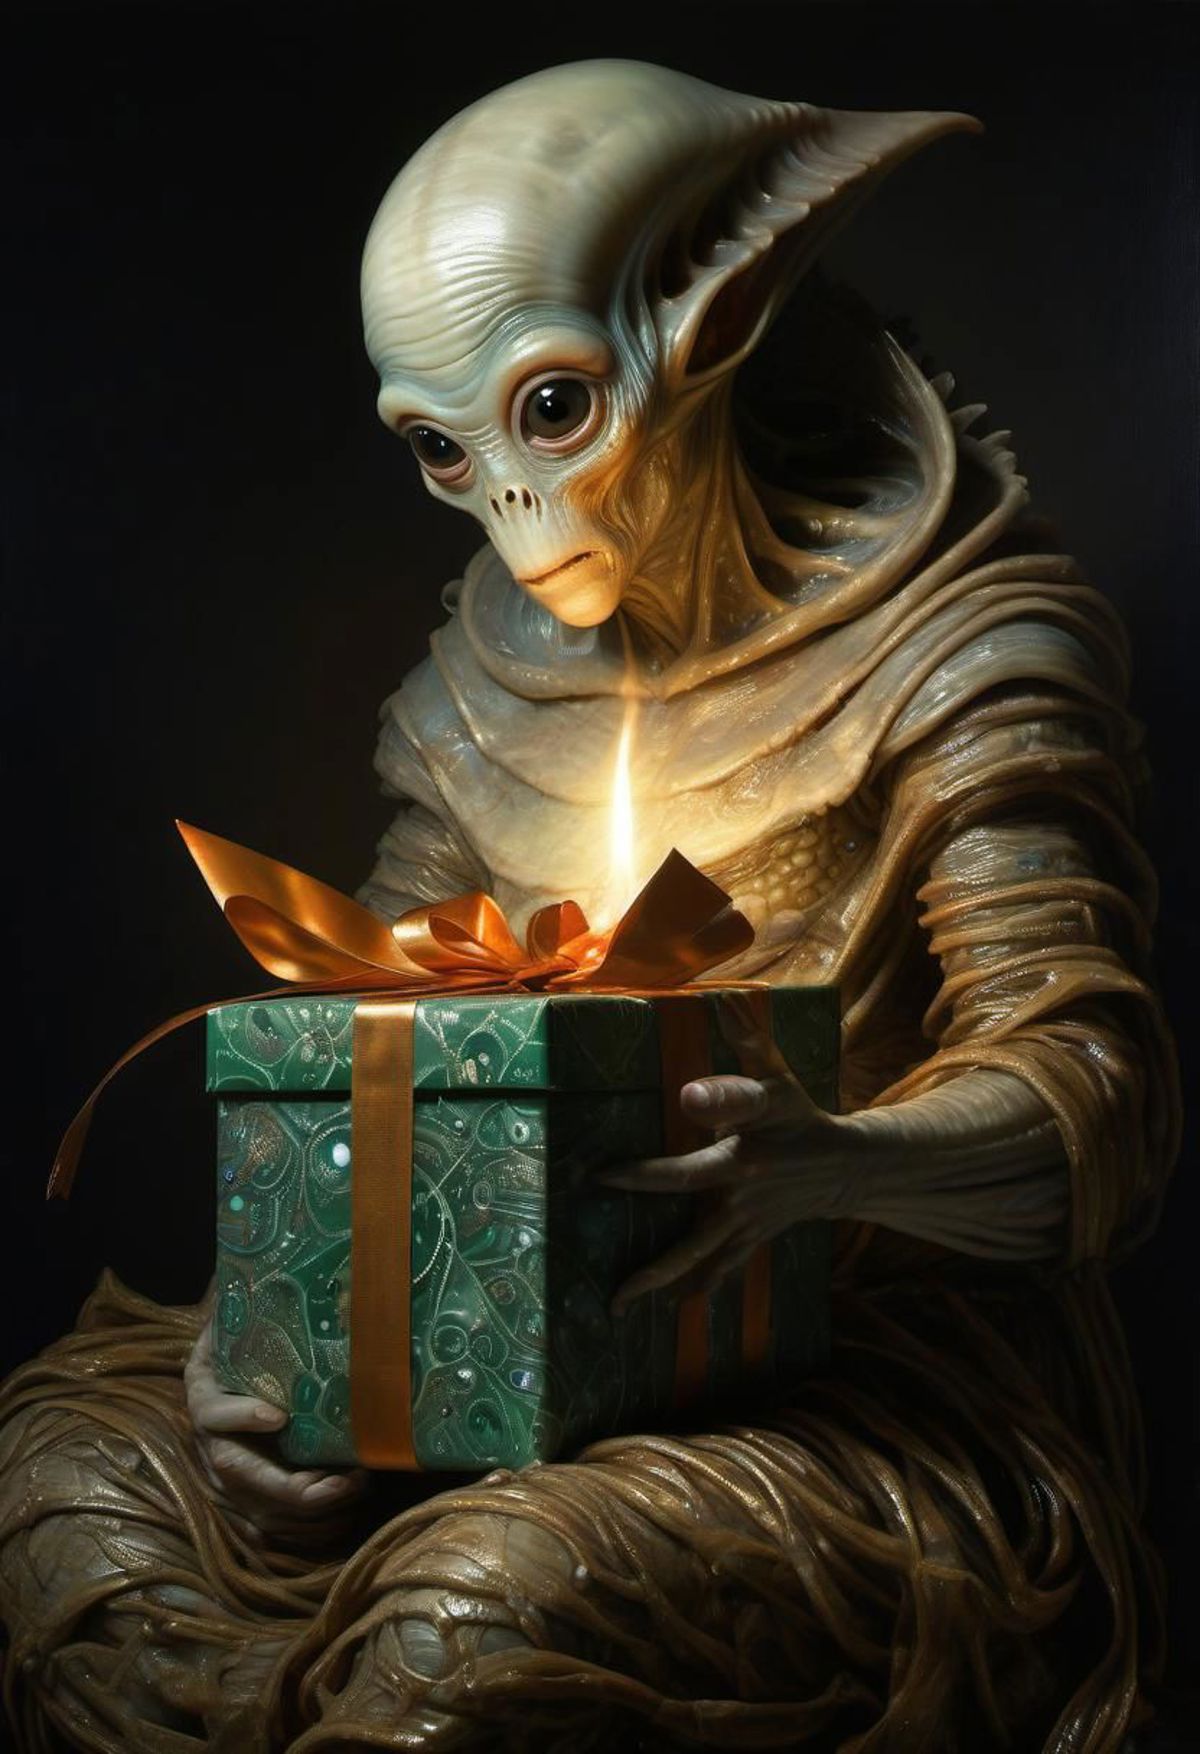 An Alien Figure Holding a Green Box with Orange Ribbon.